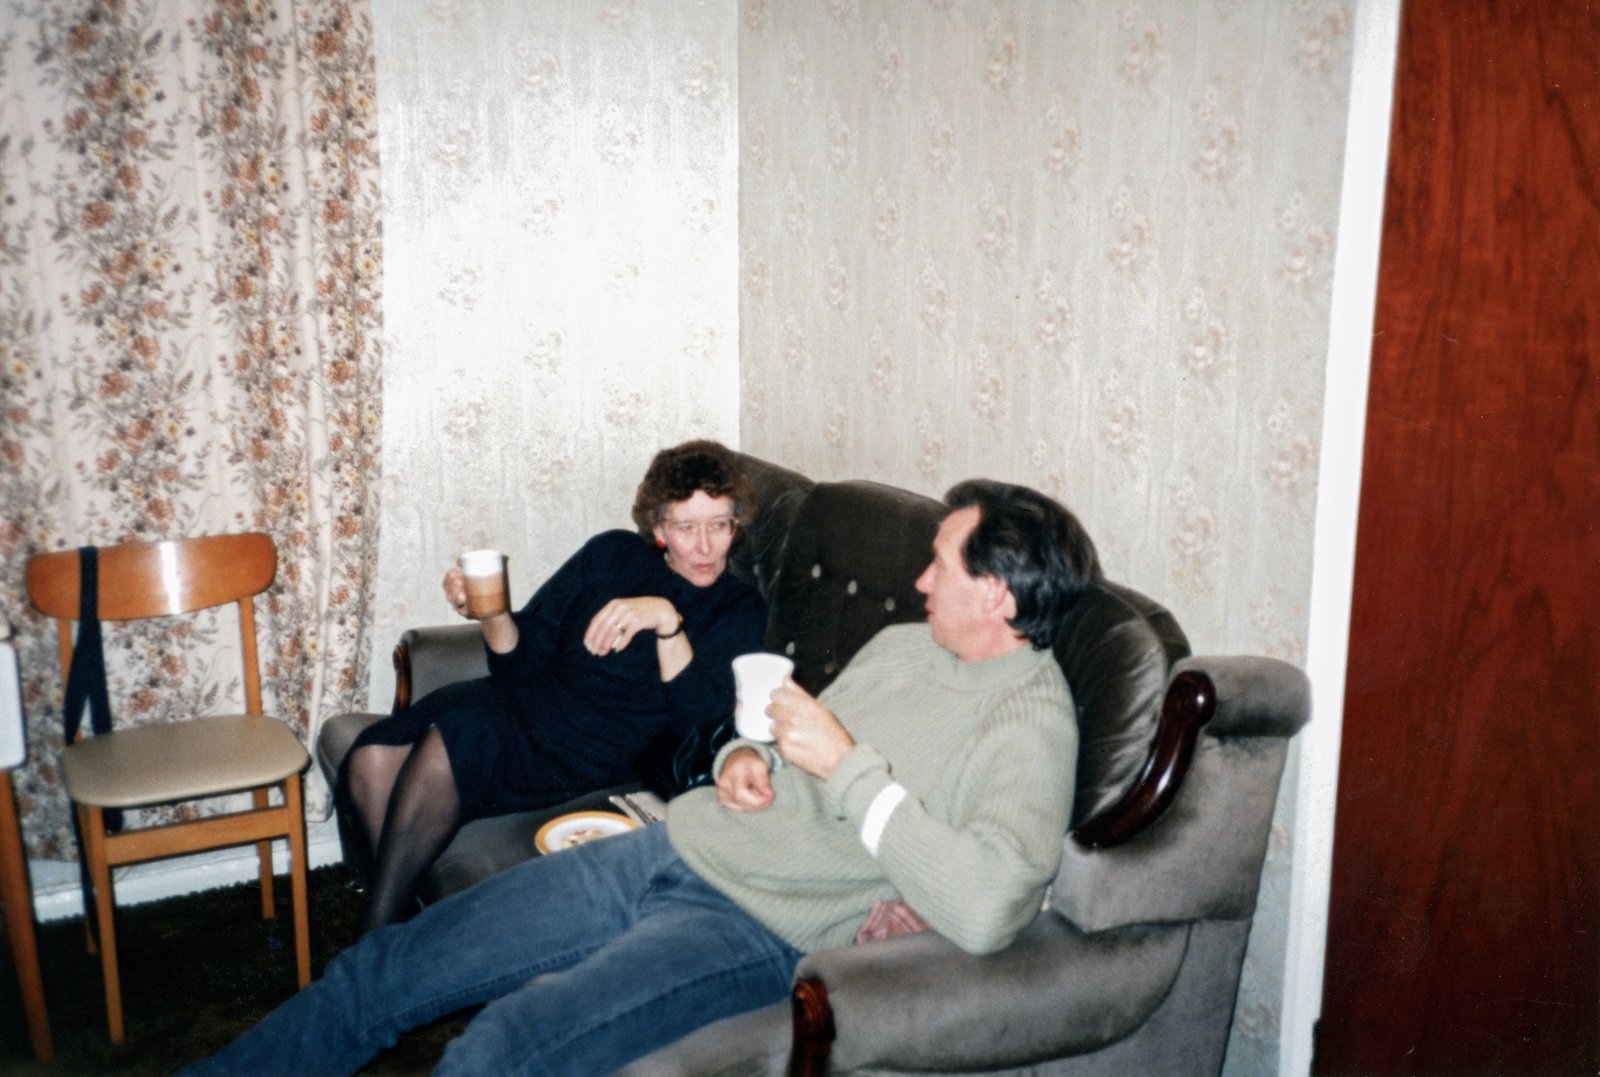 Michael having a cup of tea with his late sister Mary, 1988.